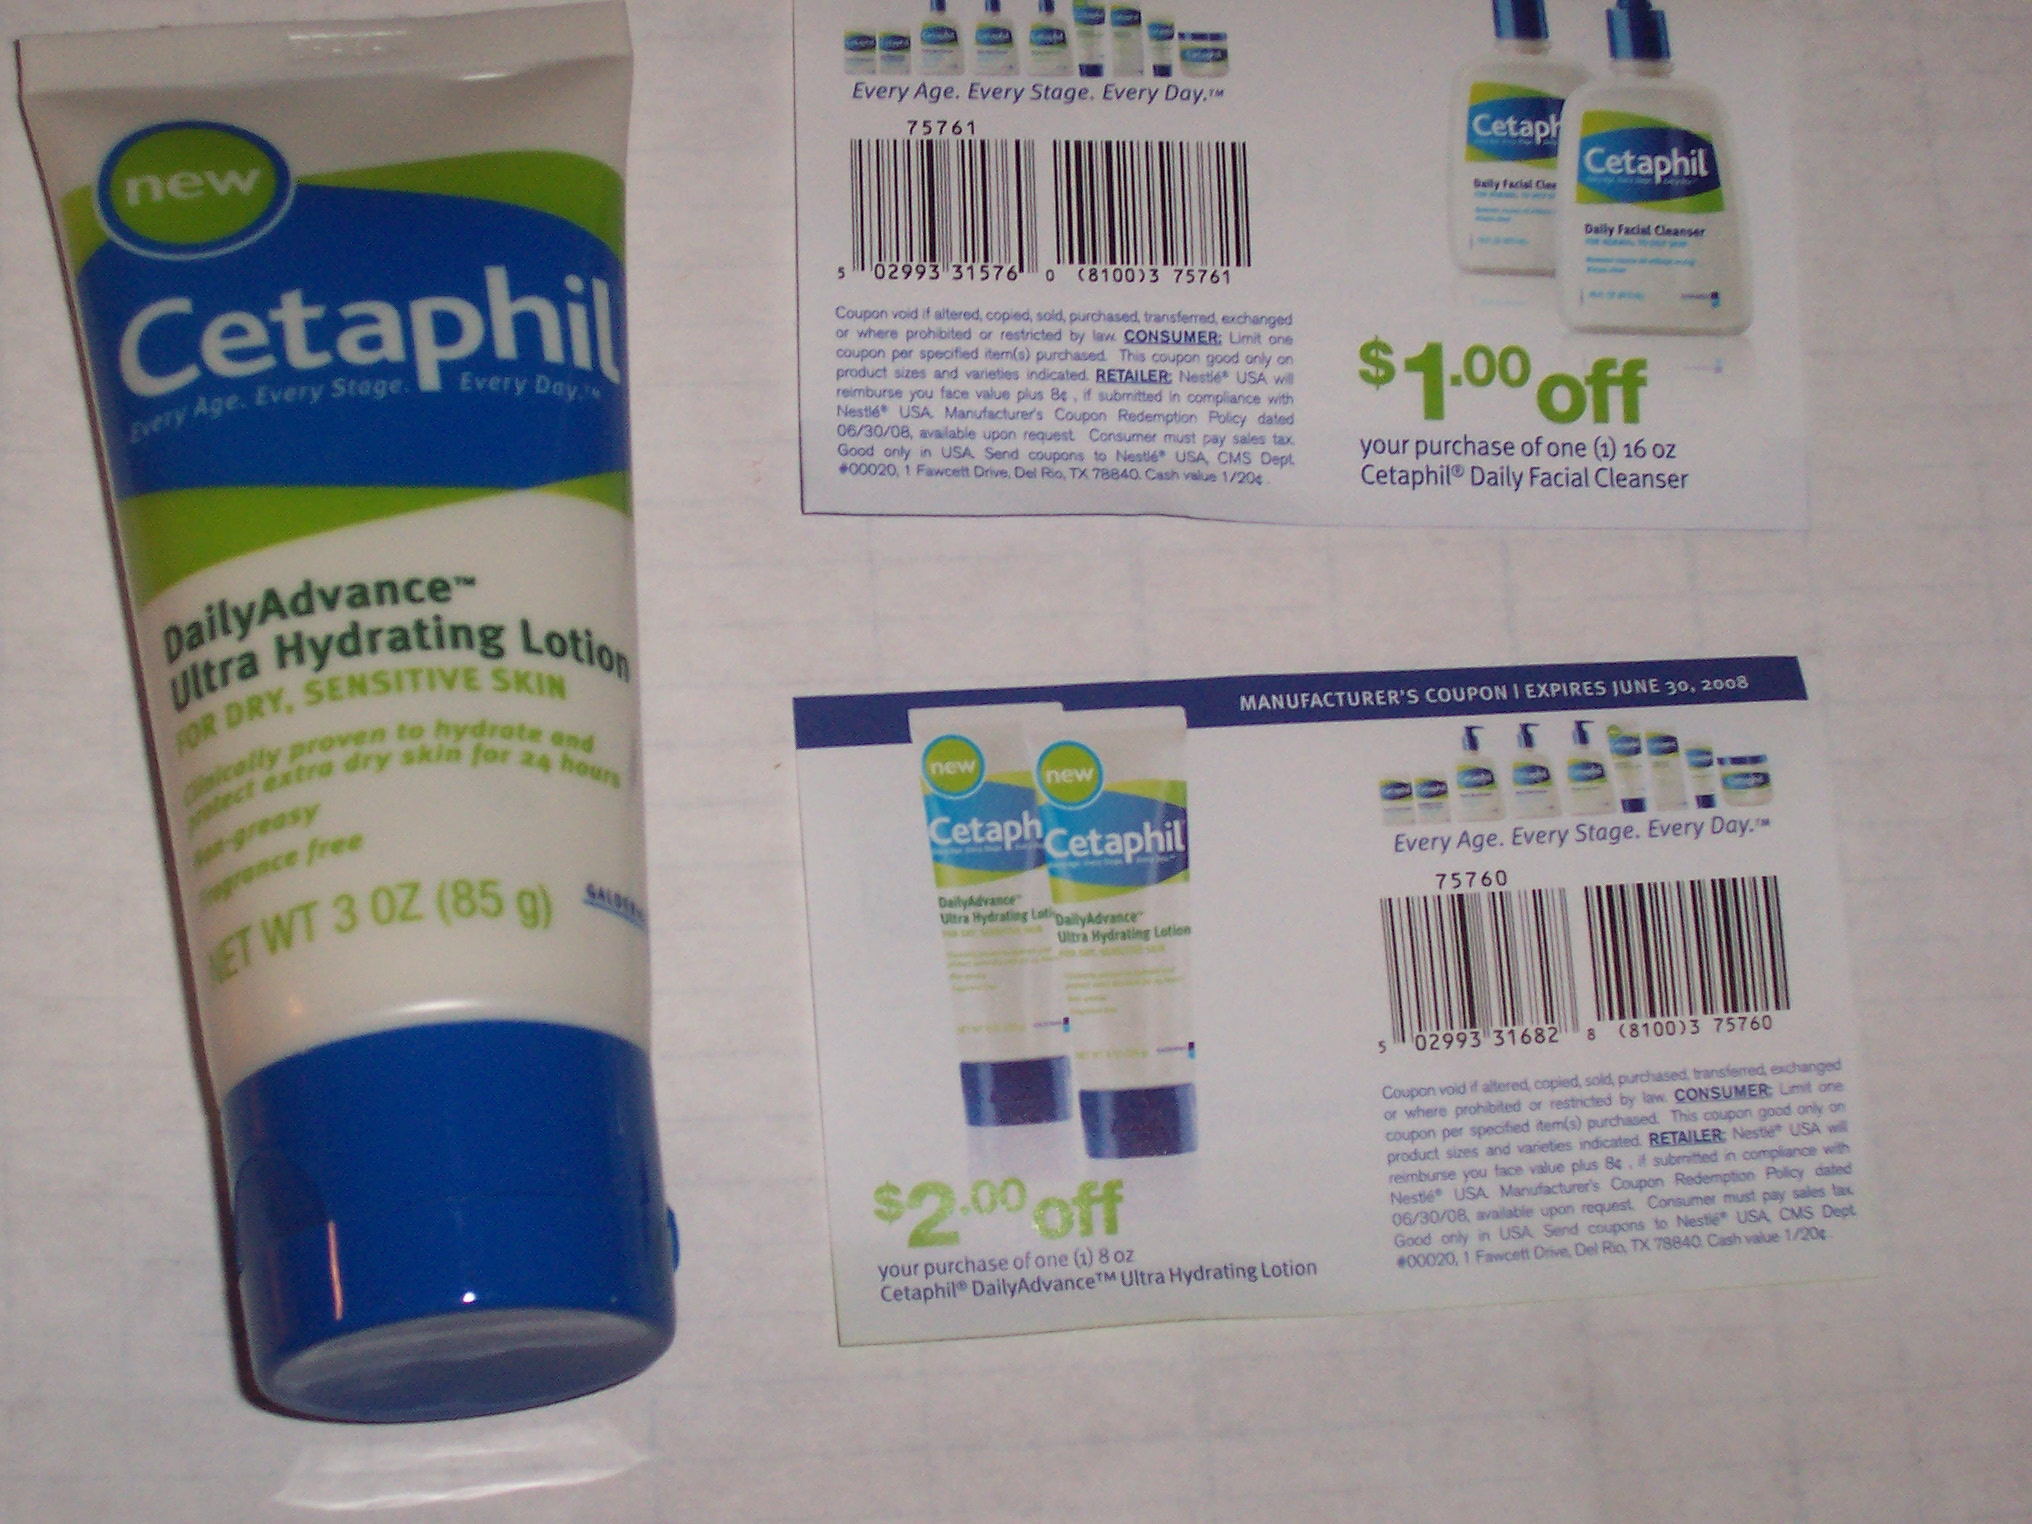 Cetaphil lotion sample with coupons